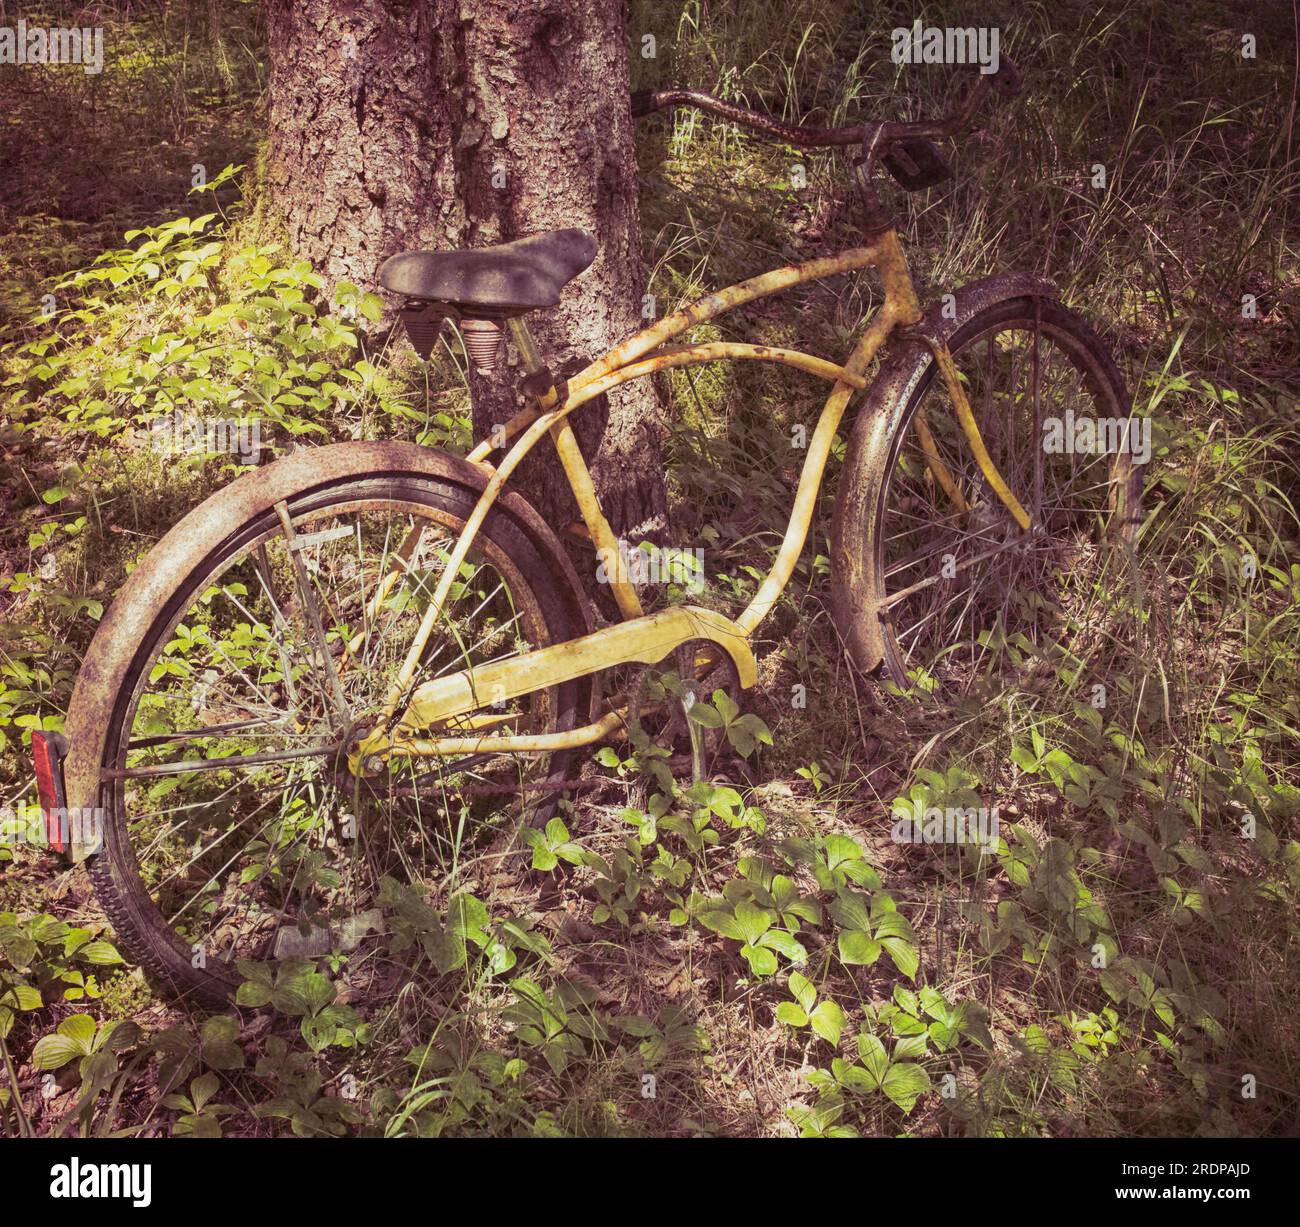 Rusty old antique bike abandoned in the woods near a tree. Stock Photo